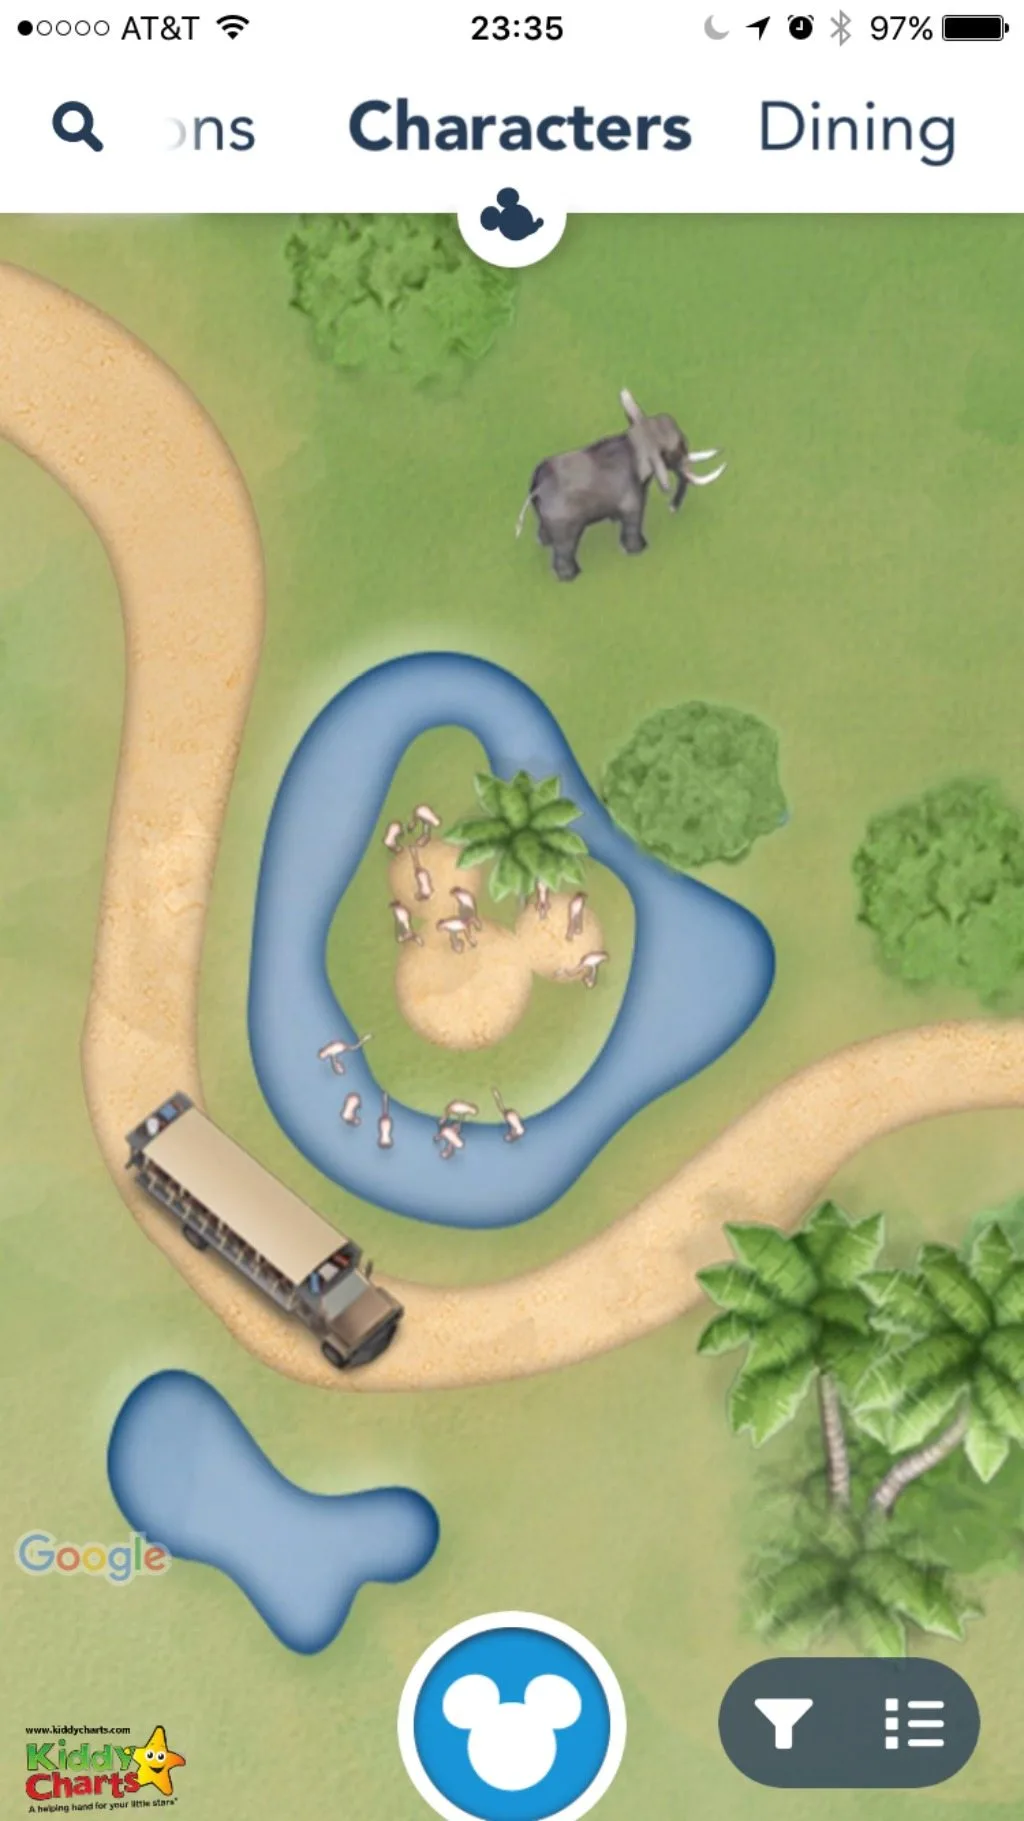 Some of the best hidden mickeys are actually in the Disney app - so you can see them at your leisure - can you spot this one in Kilimanjaro Safari? Check out the others in our article!